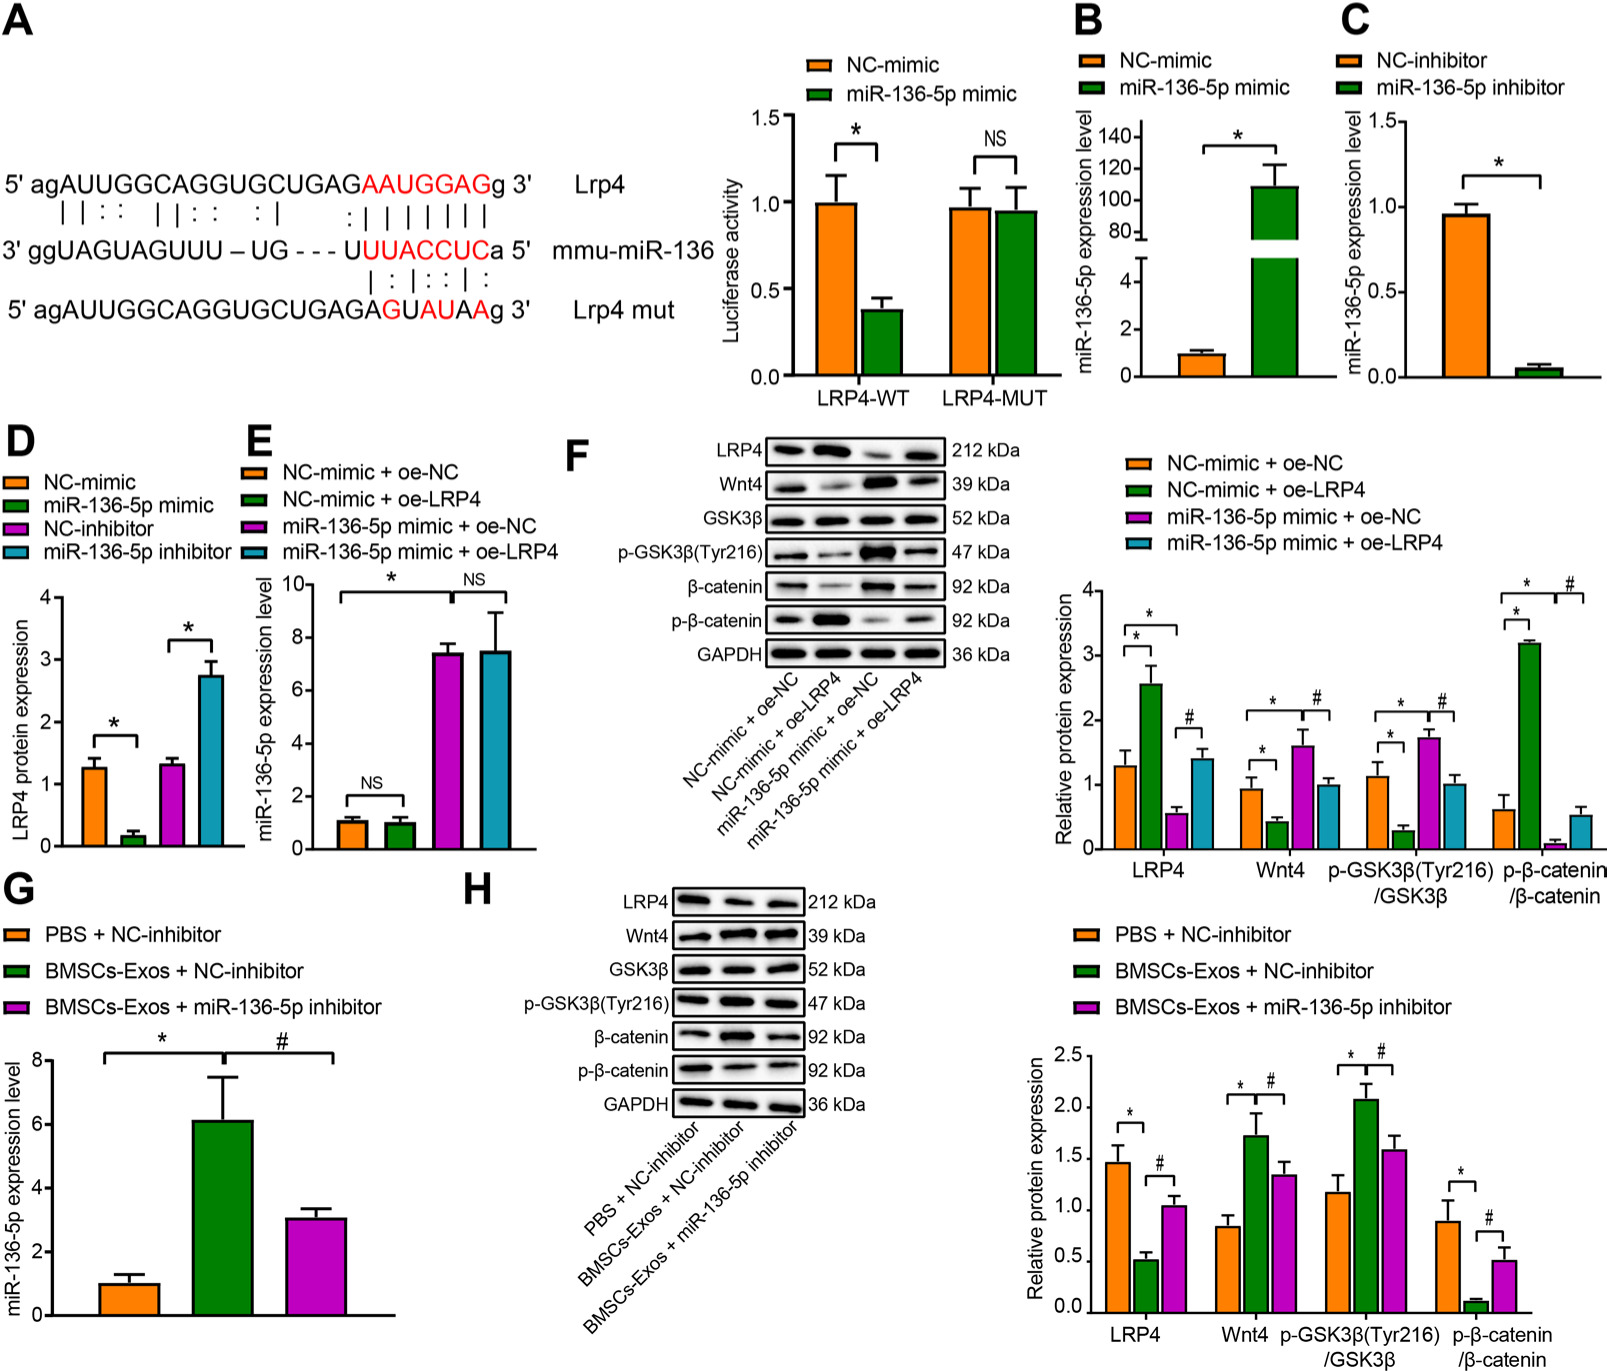 Fig. 4 
            MicroRNA (miR)-136-5p activates the Wnt/β-catenin pathway by targeting low-density lipoprotein receptor related protein 4 (LRP4). a) miR-136-5p binding sites in the LRP4 3’-untranslated region (3’-UTR) predicted by the TargetScan website, and binding of miR-136-5p to LRP4 confirmed by dual luciferase reporter gene assay in HEK293 cells; b) reverse transcription quantitative polymerase chain reaction (RT-qPCR) detection of the transfection efficiency of miR-136-5p mimic in MC3T3-E1 cells; c) RT-qPCR detection of the transfection efficiency of miR-136-5p inhibitor in MC3T3-E1 cells; d) Western blot detection of the protein expression of LRP4 in MC3T3-E1 cells with miR-136-5p overexpression or silencing; e) RT-qPCR detection of the expression of miR-136-5p in MC3T3-E1 cells transfected with miR-136-5p mimic, oe-LRP4, or both; f) Western blot detection of the expression of LRP4 and Wnt/β-catenin pathway related proteins in MC3T3-E1 cells transfected with miR-136-5p mimic, oe-LRP4, or both; g) RT-qPCR detected the expression of miR-136-5p in MC3T3-E1 cells treated with BMSC-Exos or in combination with miR-136-5p inhibitor; h) Western blot detection of the expression of LRP4 and Wnt/β-catenin pathway related proteins in MC3T3-E1 cells treated with BMSC-Exos or in combination with miR-136-5p inhibitor. # indicates p < 0.05, and non-significant (NS) represents p > 0.05. Measurement data were presented as mean and standard deviation. Unpaired t-test was used for data comparison between two groups while data comparisons among multiple groups were performed using one-way analysis of variance (ANOVA) with Tukey’s post hoc test. Data comparison among groups at different timepoints was performed by repeated measurement ANOVA with Bonferroni’s post hoc test. The experiment was repeated three times. MUT, mutant; PBS, phosphate-buffered saline; WT, wild type.
          